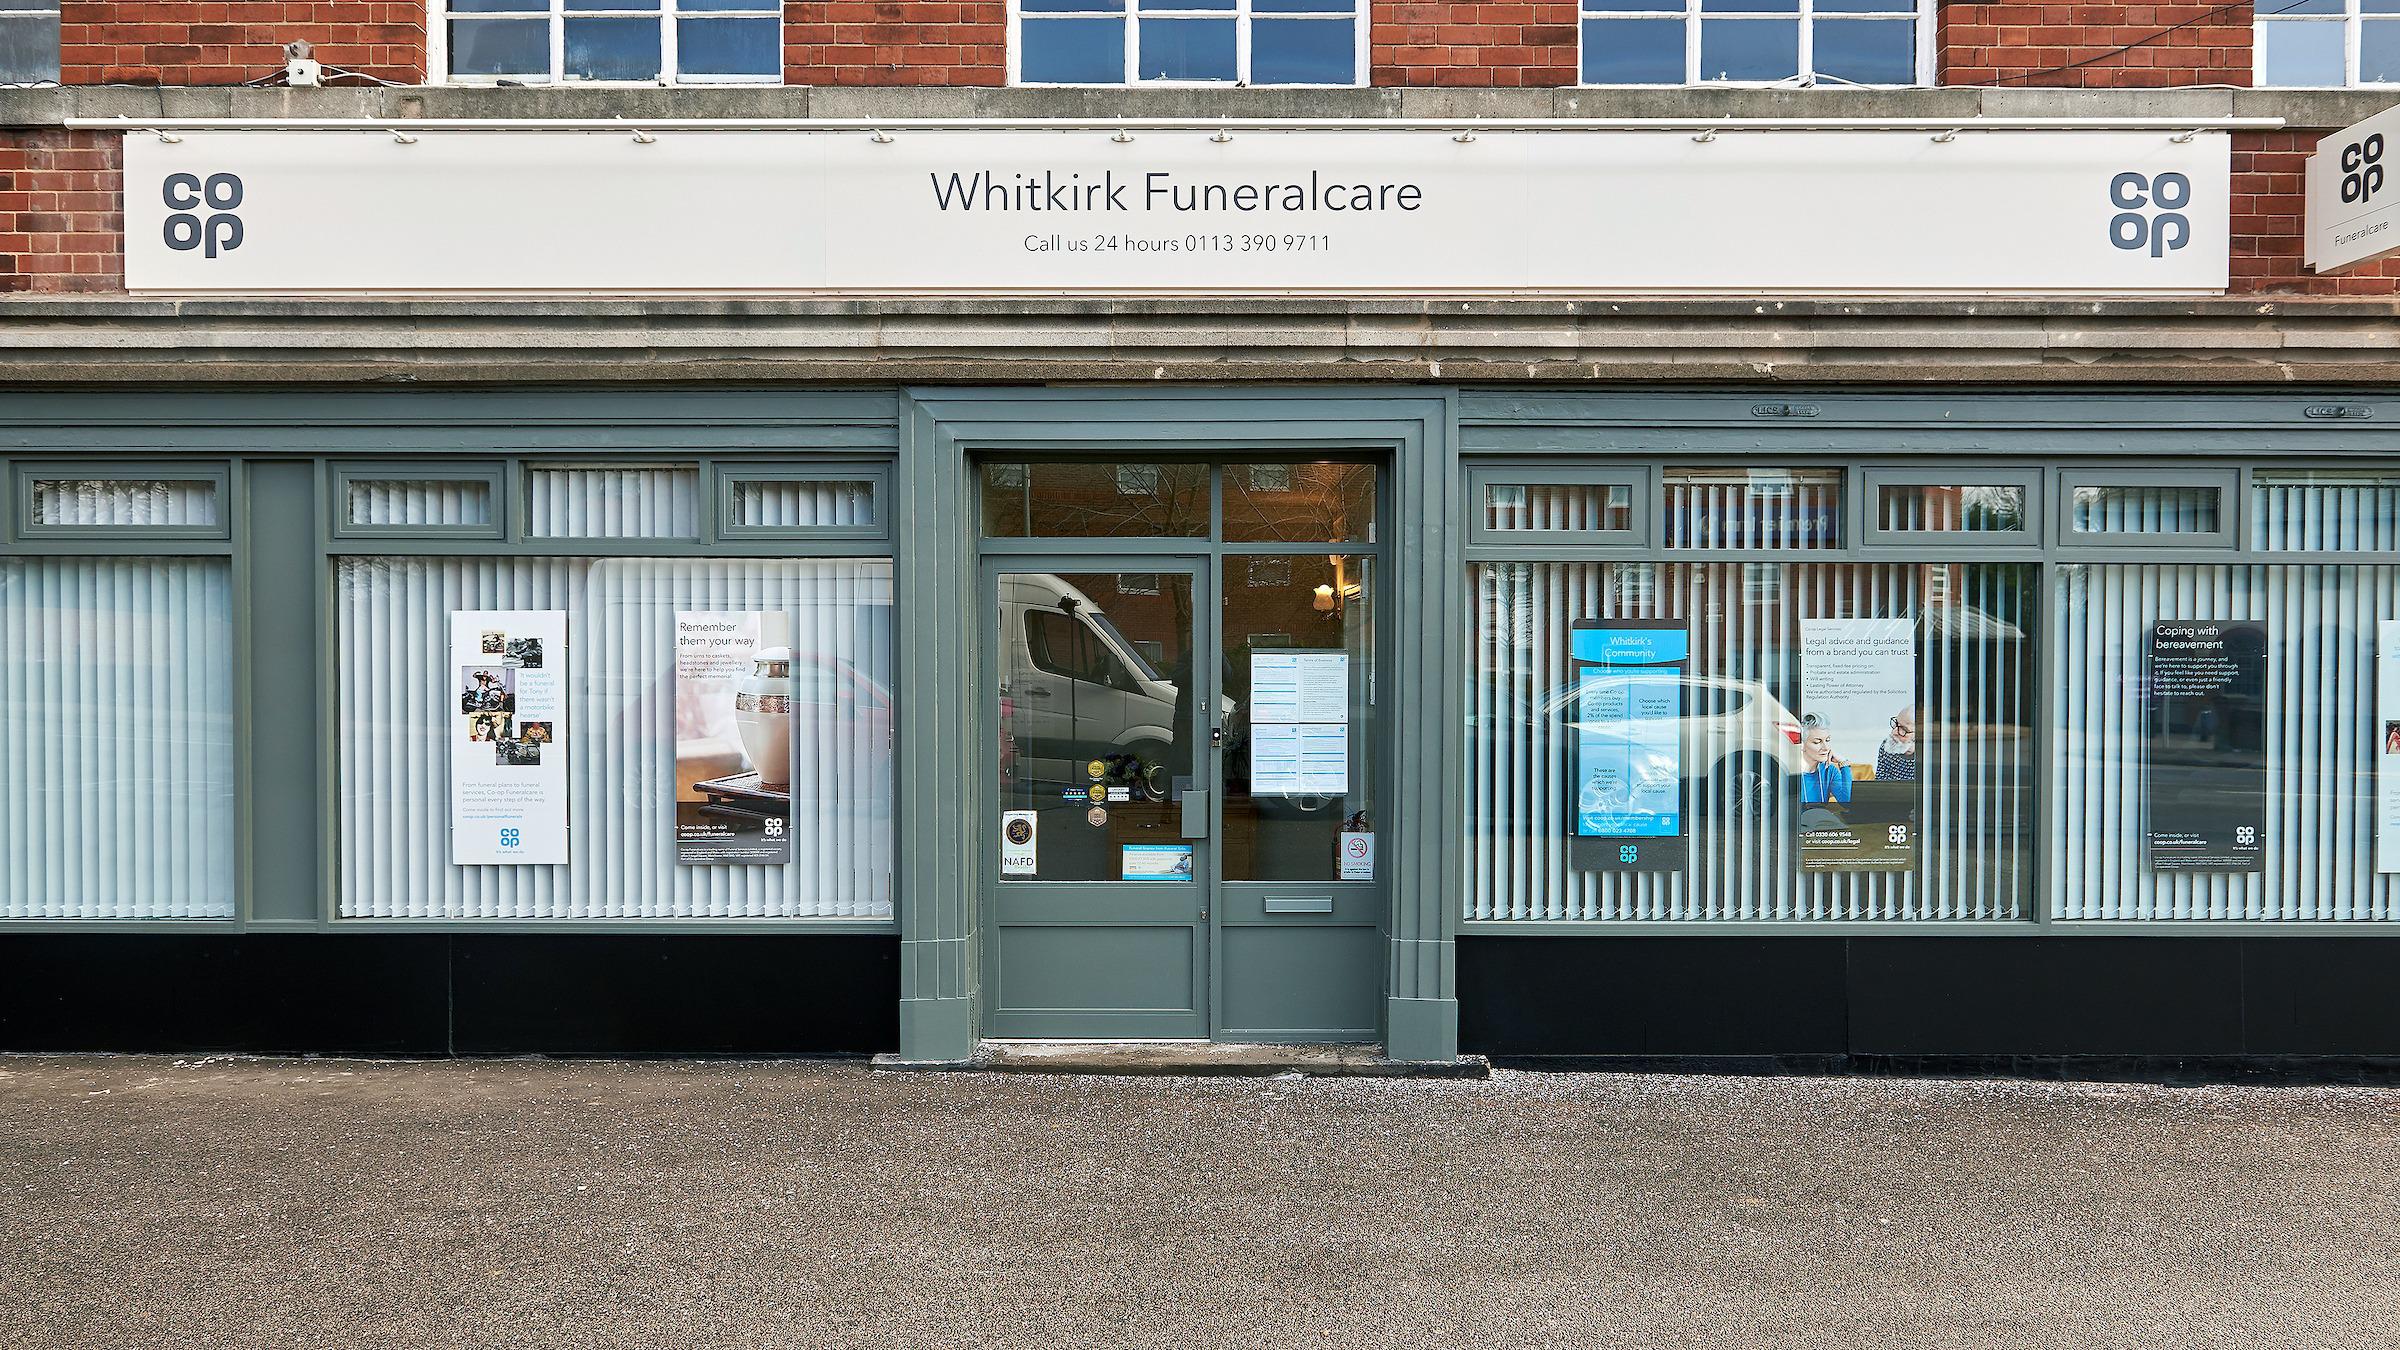 Images Co-op Funeralcare, Whitkirk